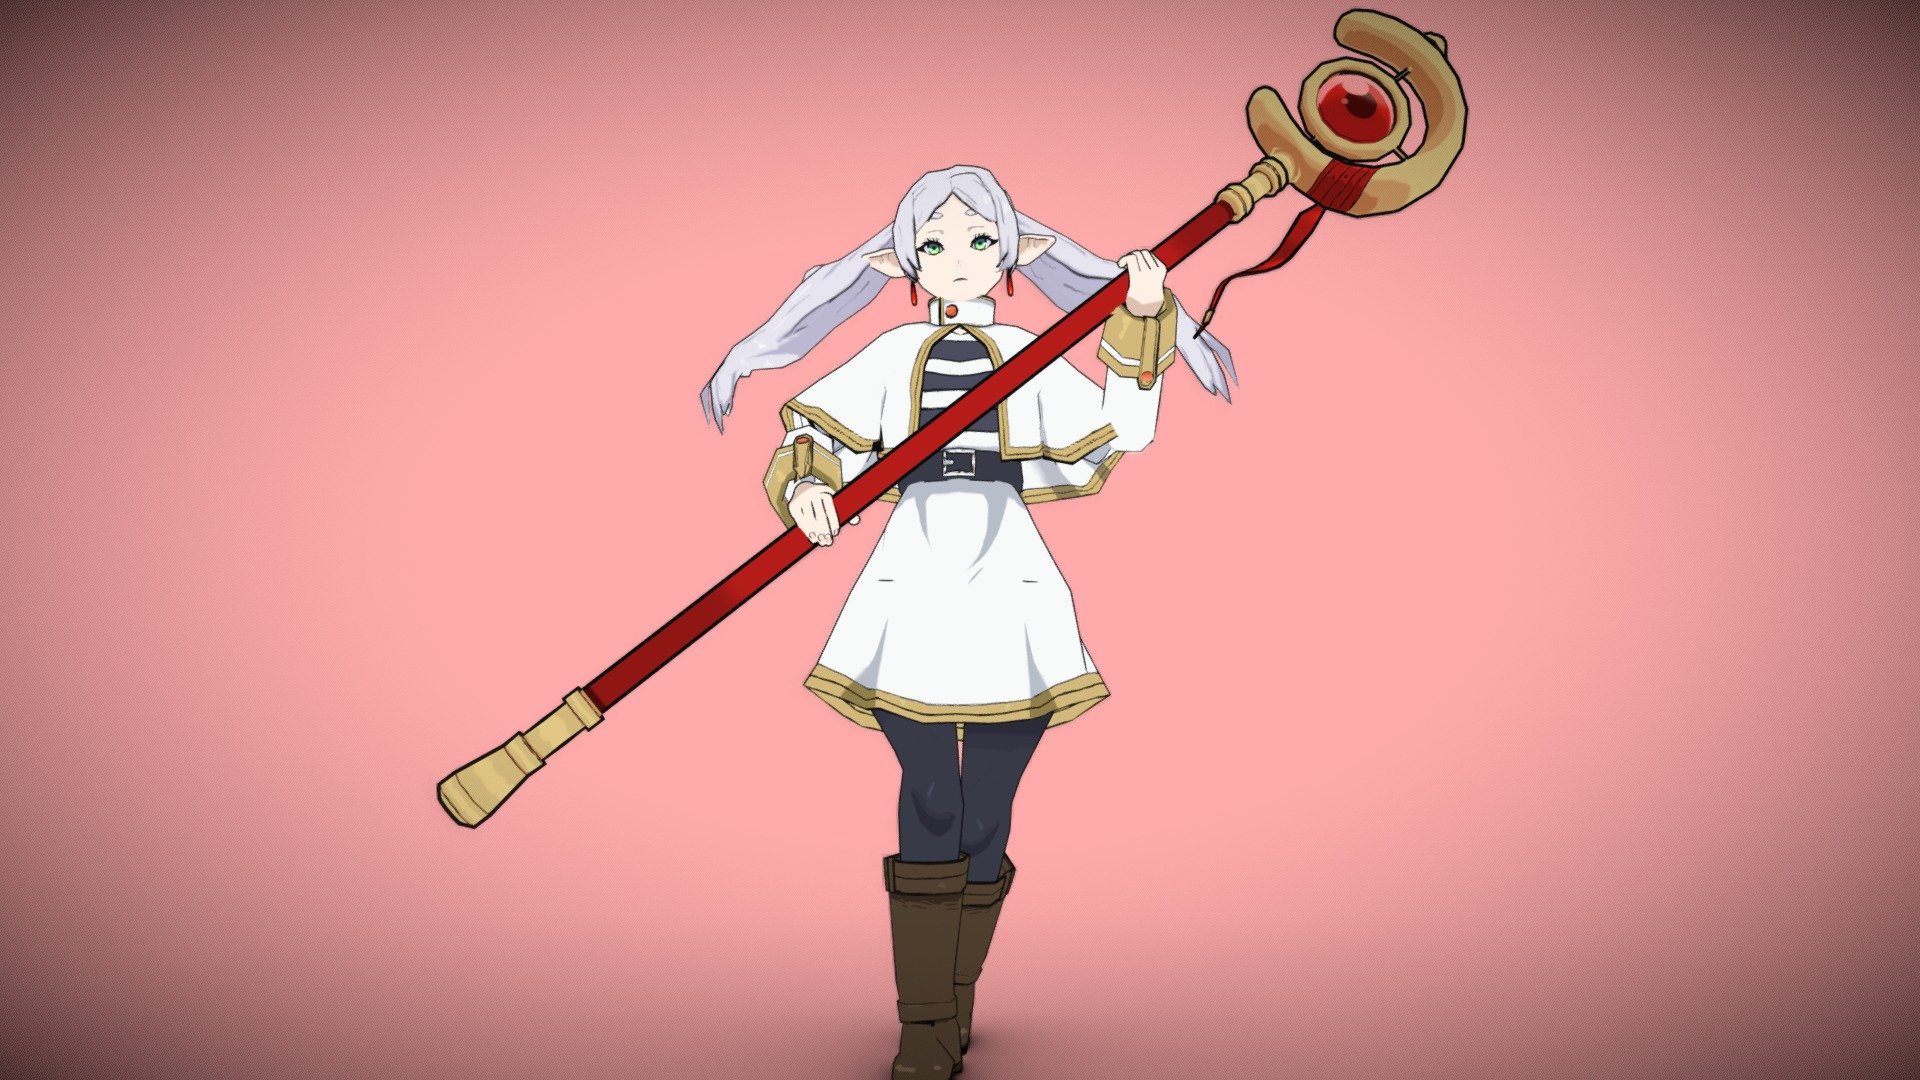 3D model of frieren, new anime, now with her wand, its rigged, it takes me a while, so i hope you like it, it have some problems with clips i guess and texture, but i'm glad with the model - Frieren with her wand - 3D model by g0rra 3d model